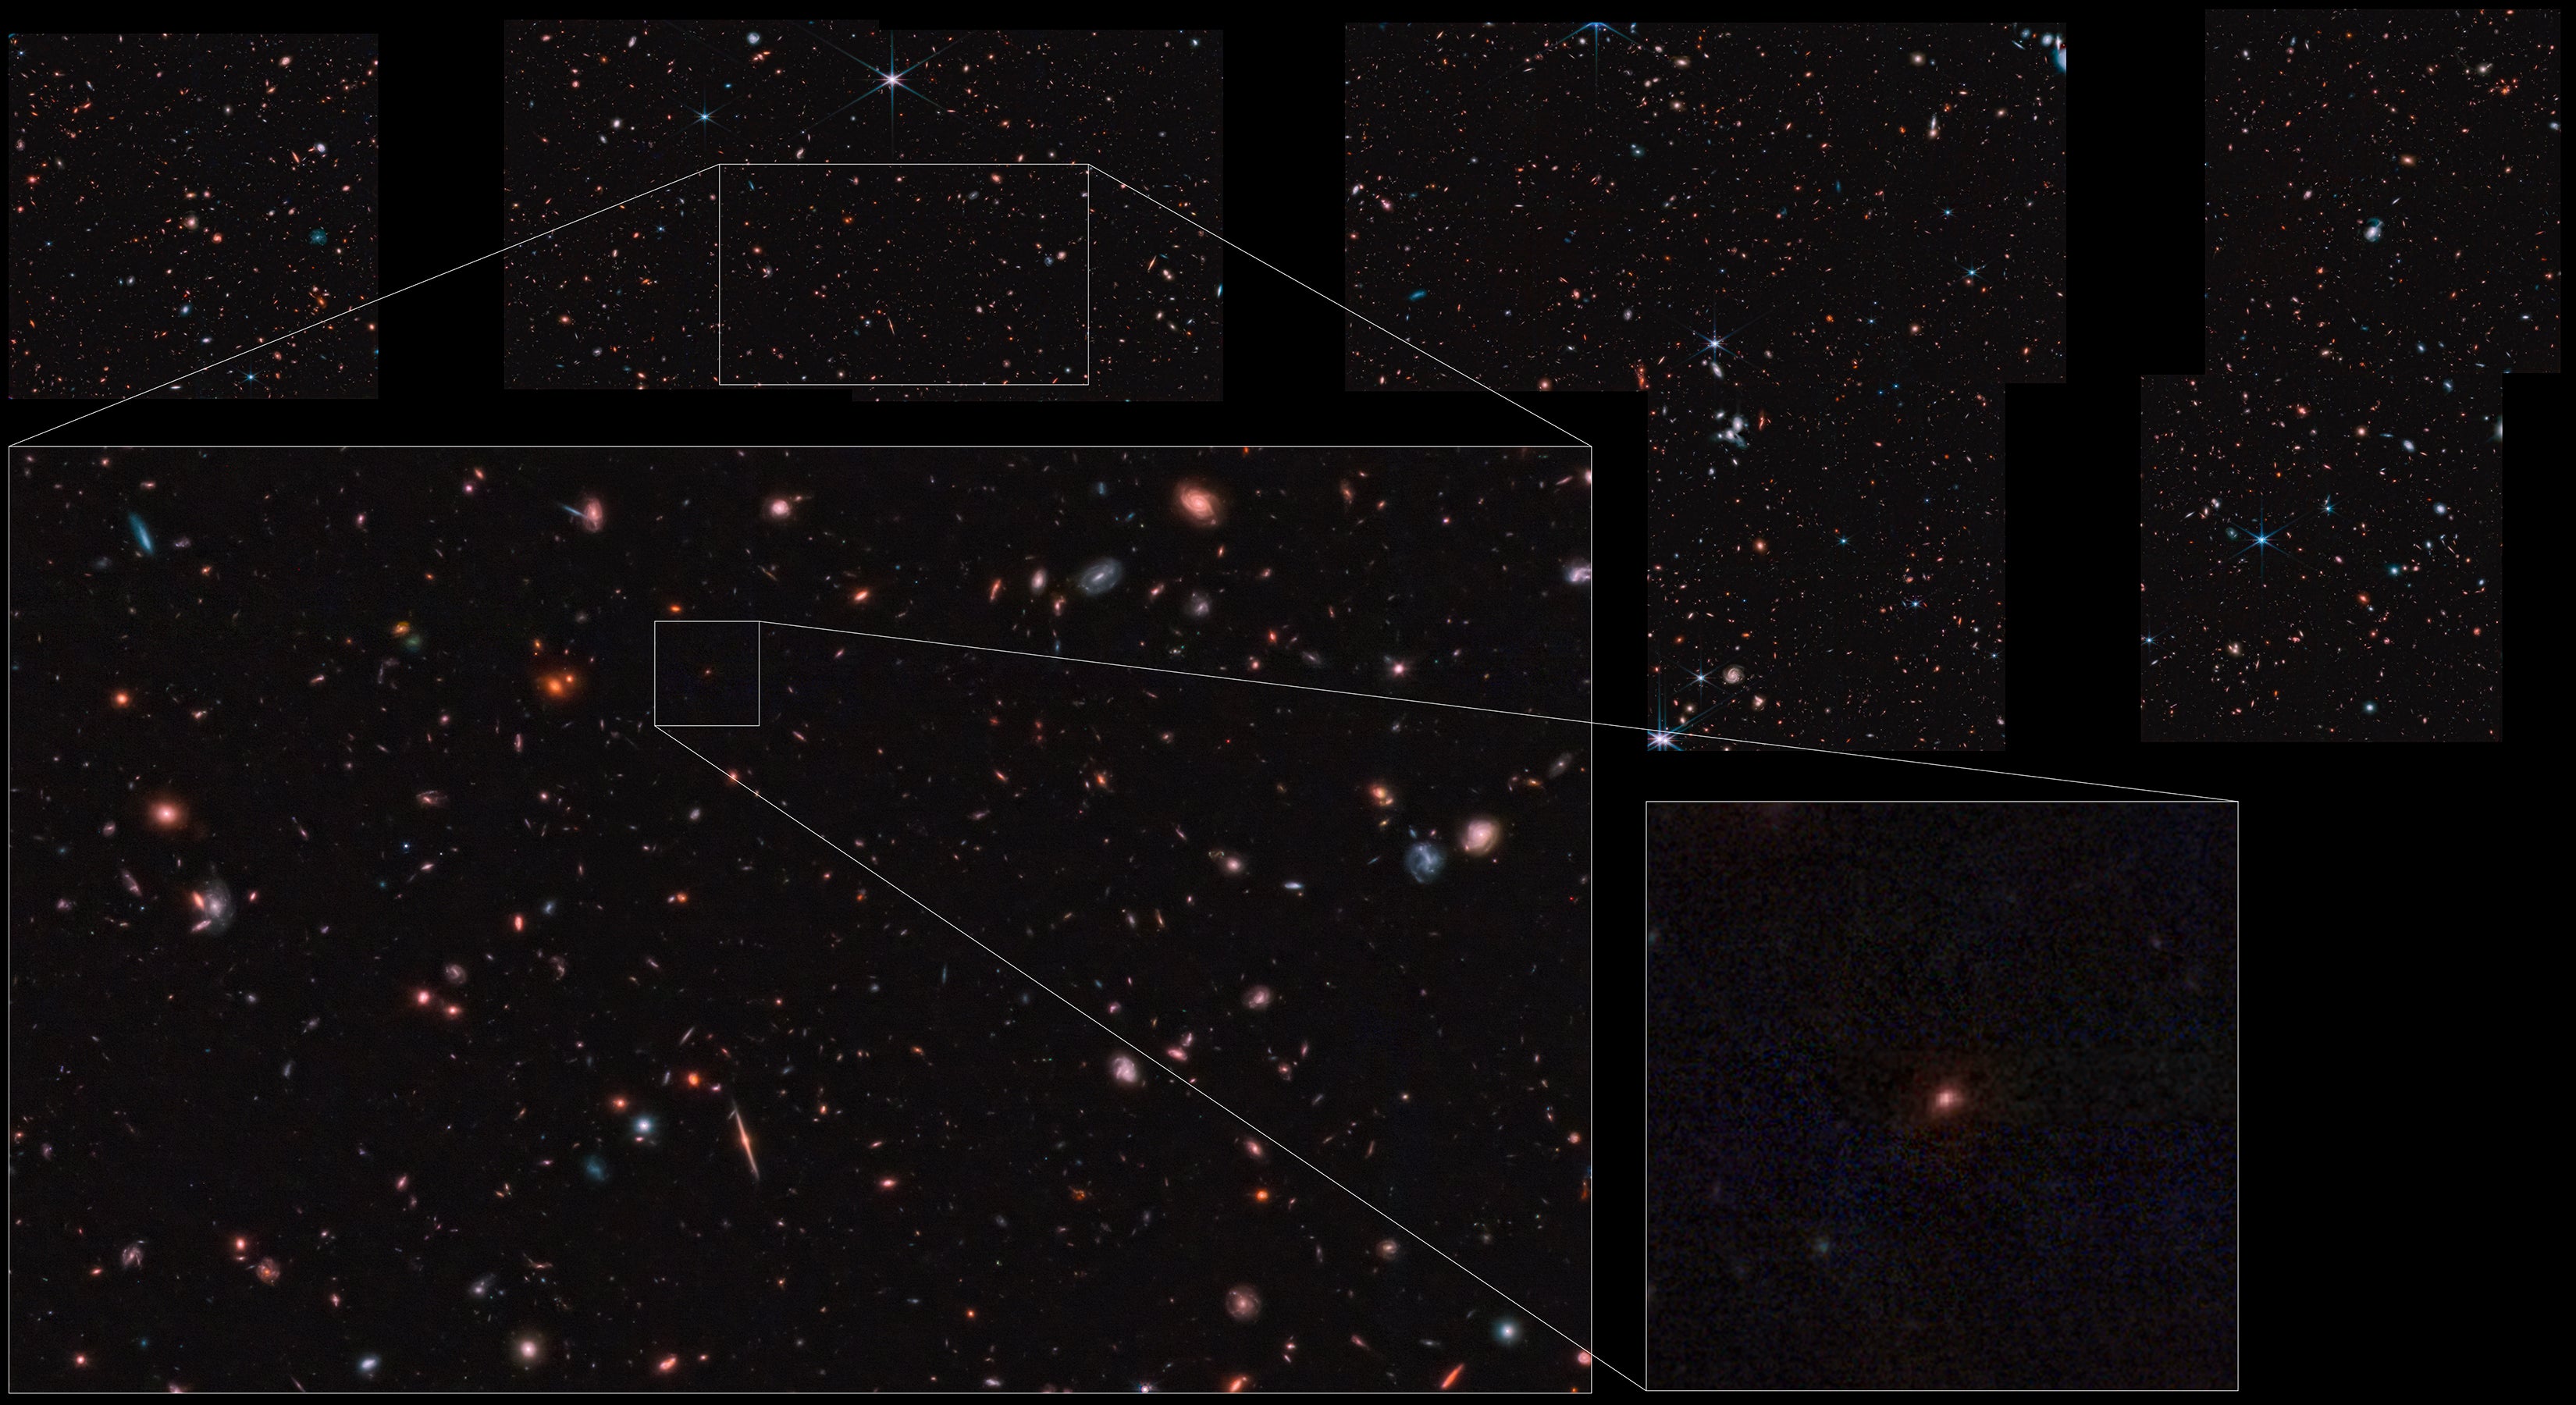 This small reddish clump (in the square box at lower right) may be one of the earliest galaxies ever observed, appearing less than 400 million years after the big bang. Found in JWST observations gathered by the CEERS collaboration, it has been dubbed “Maisie’s galaxy” after the daughter of CEERS project leader Steven Finkelstein